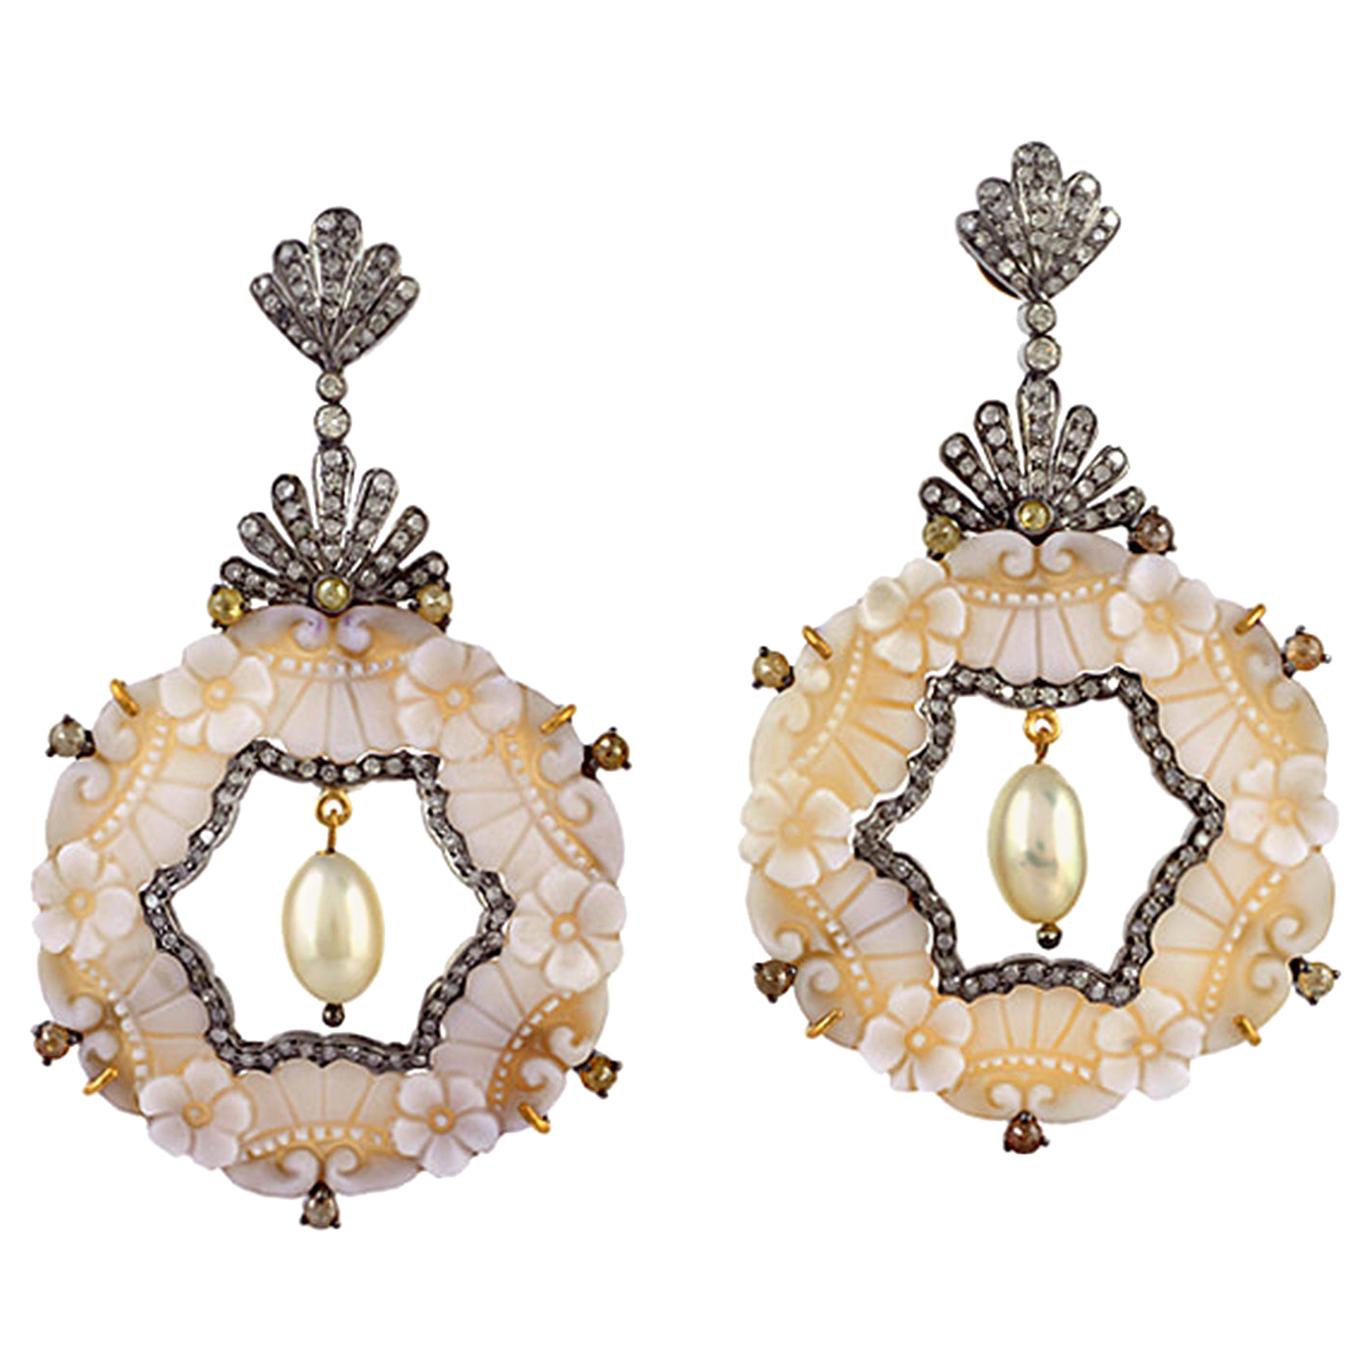 Carved Cameo Diamond 18 Karat Gold Floral Earrings